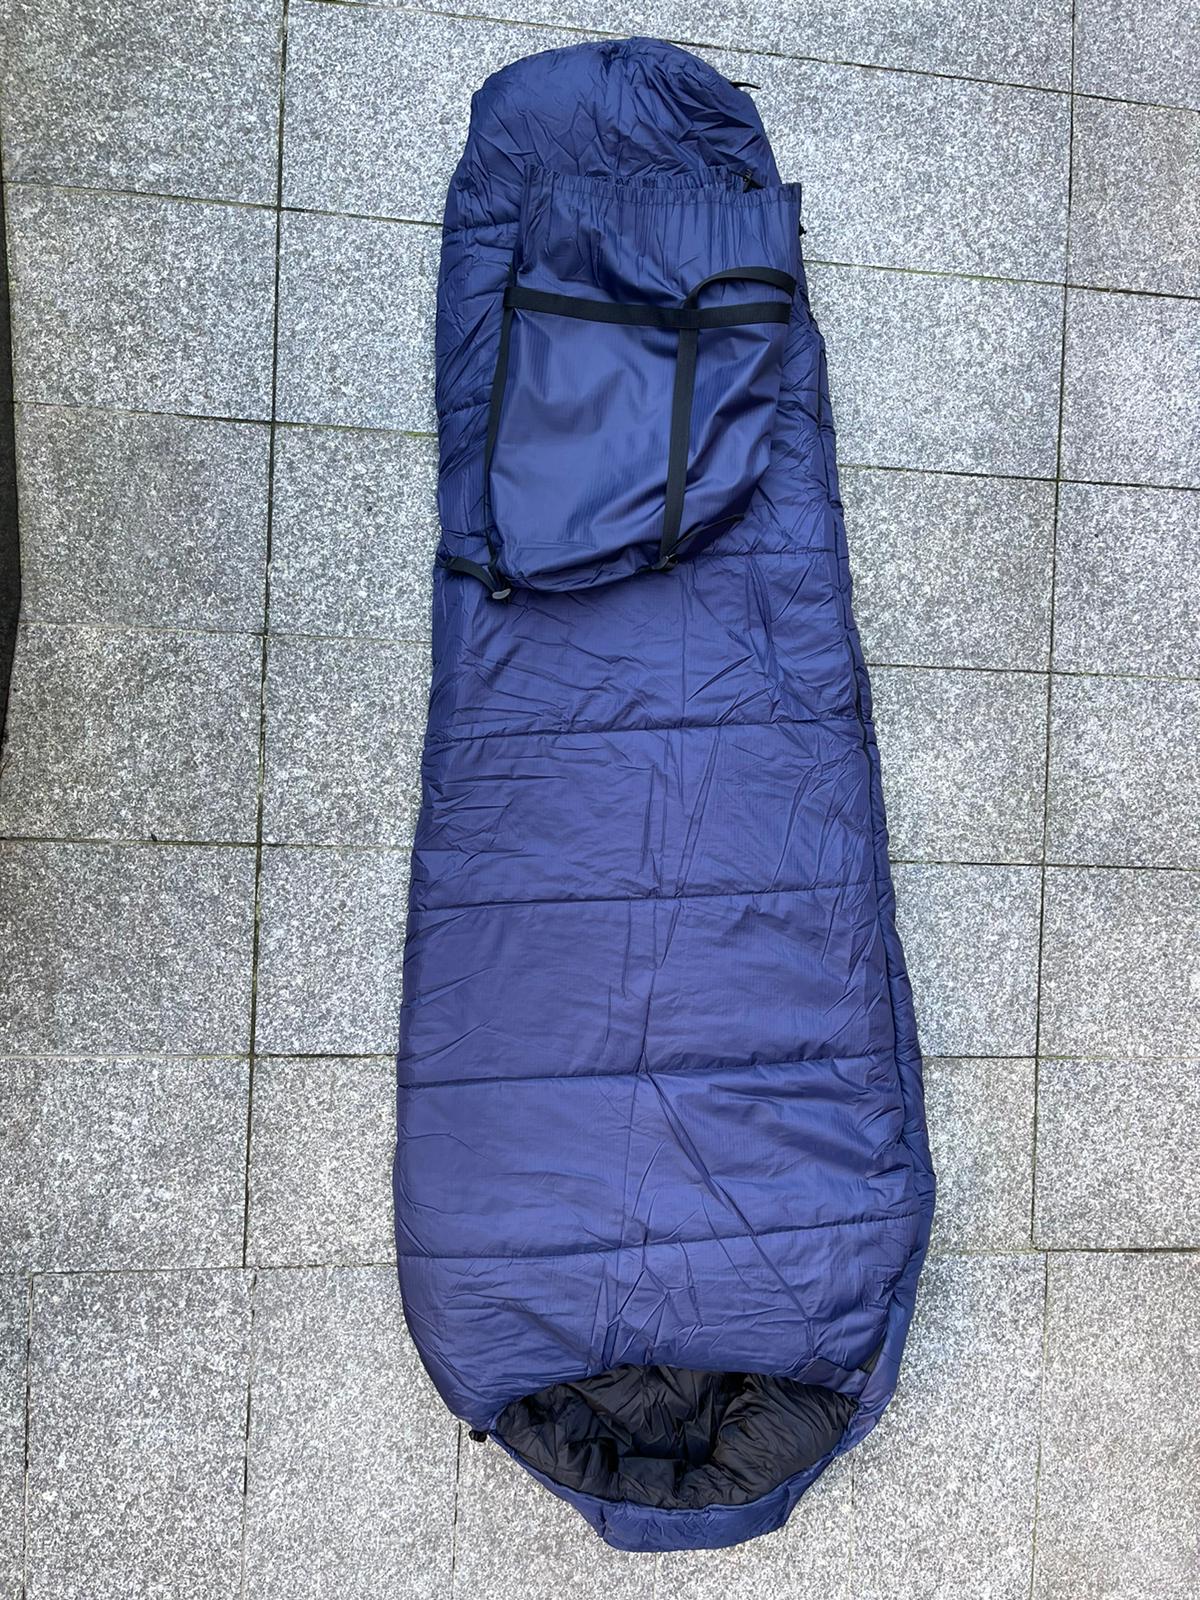 Military Sleeping Bags Cold Weather